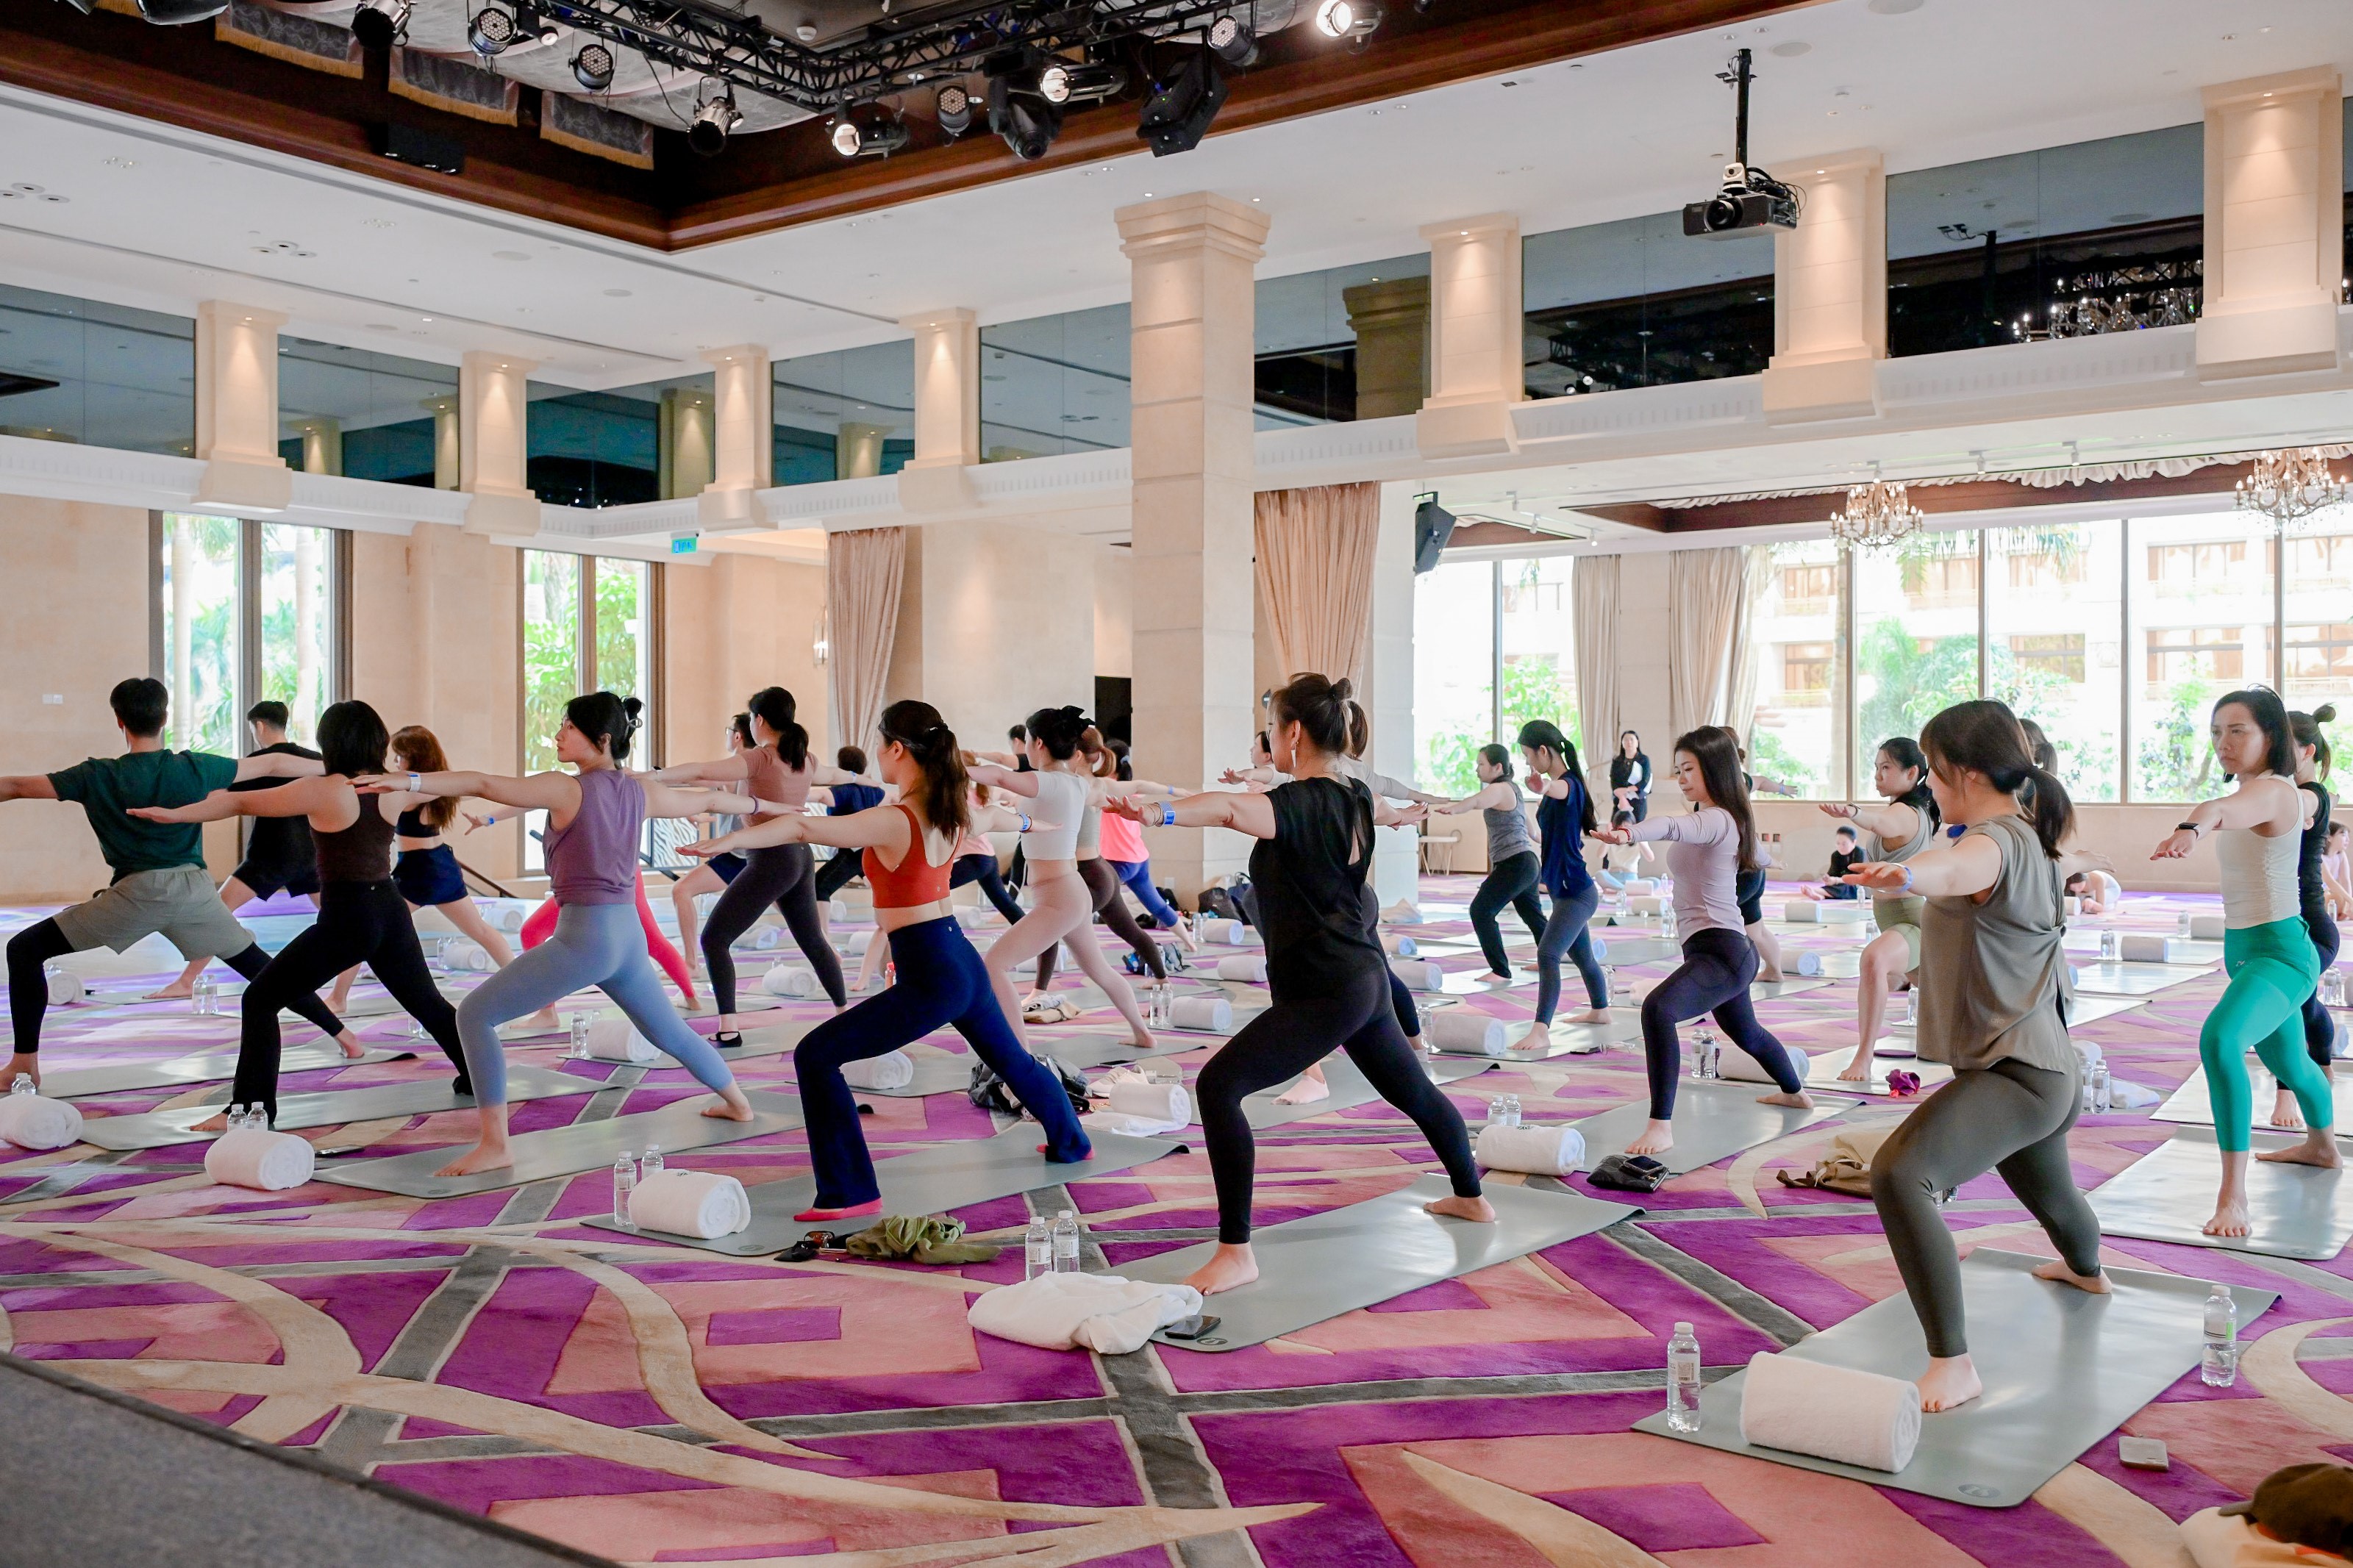 The day began with morning yoga sessions, promoting deep stretches and full-body relaxation.